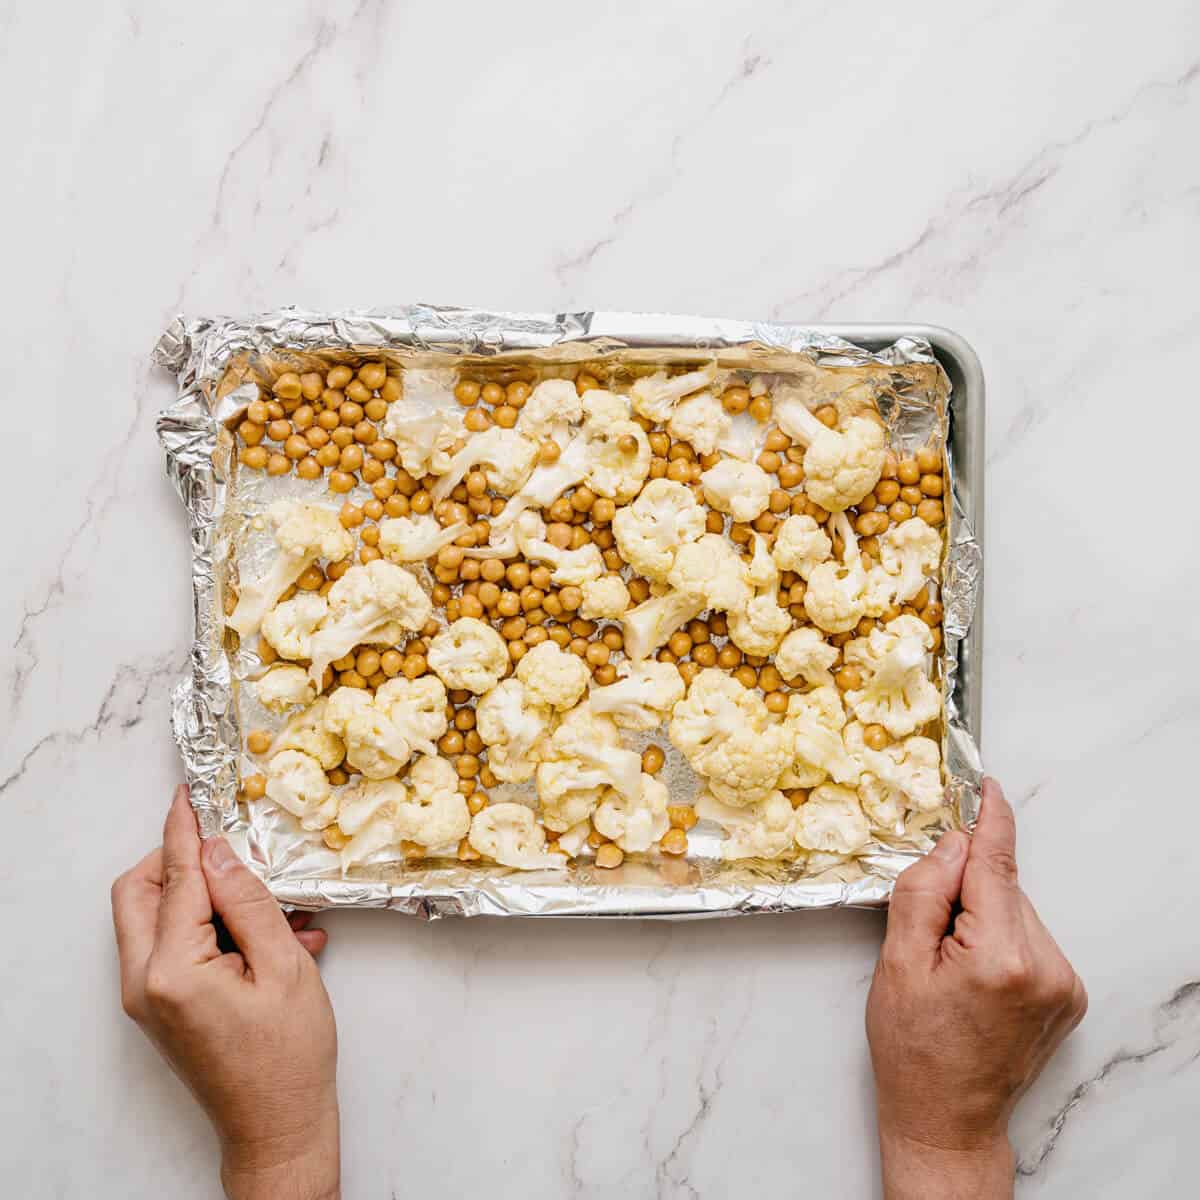 cauliflower florets and chickpeas on a lined baking tray.